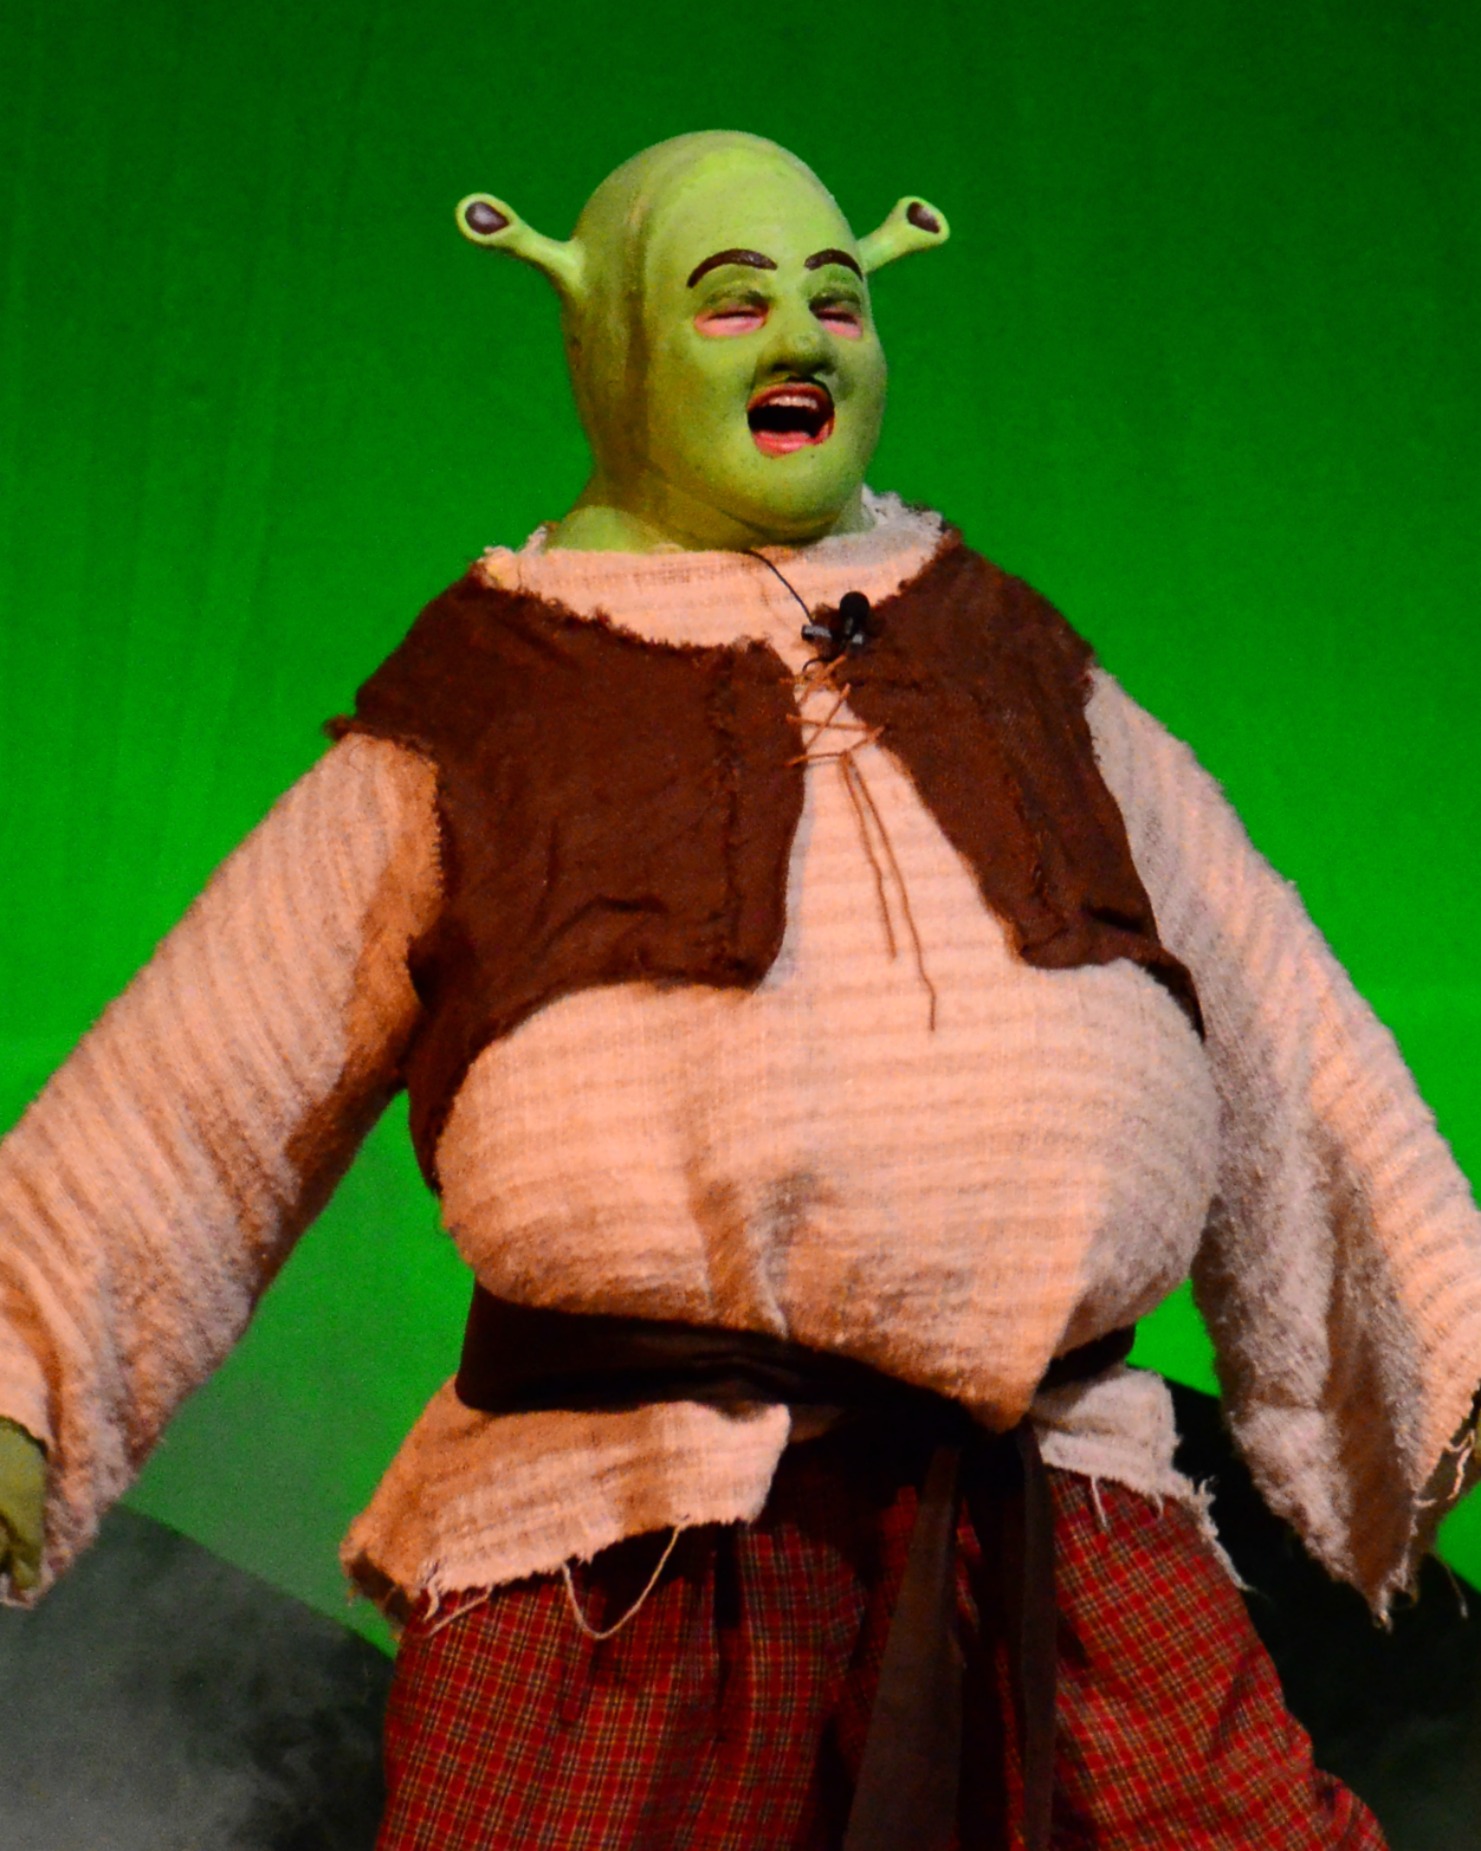 a man in an odd outfit with big green hair and bulging eyes